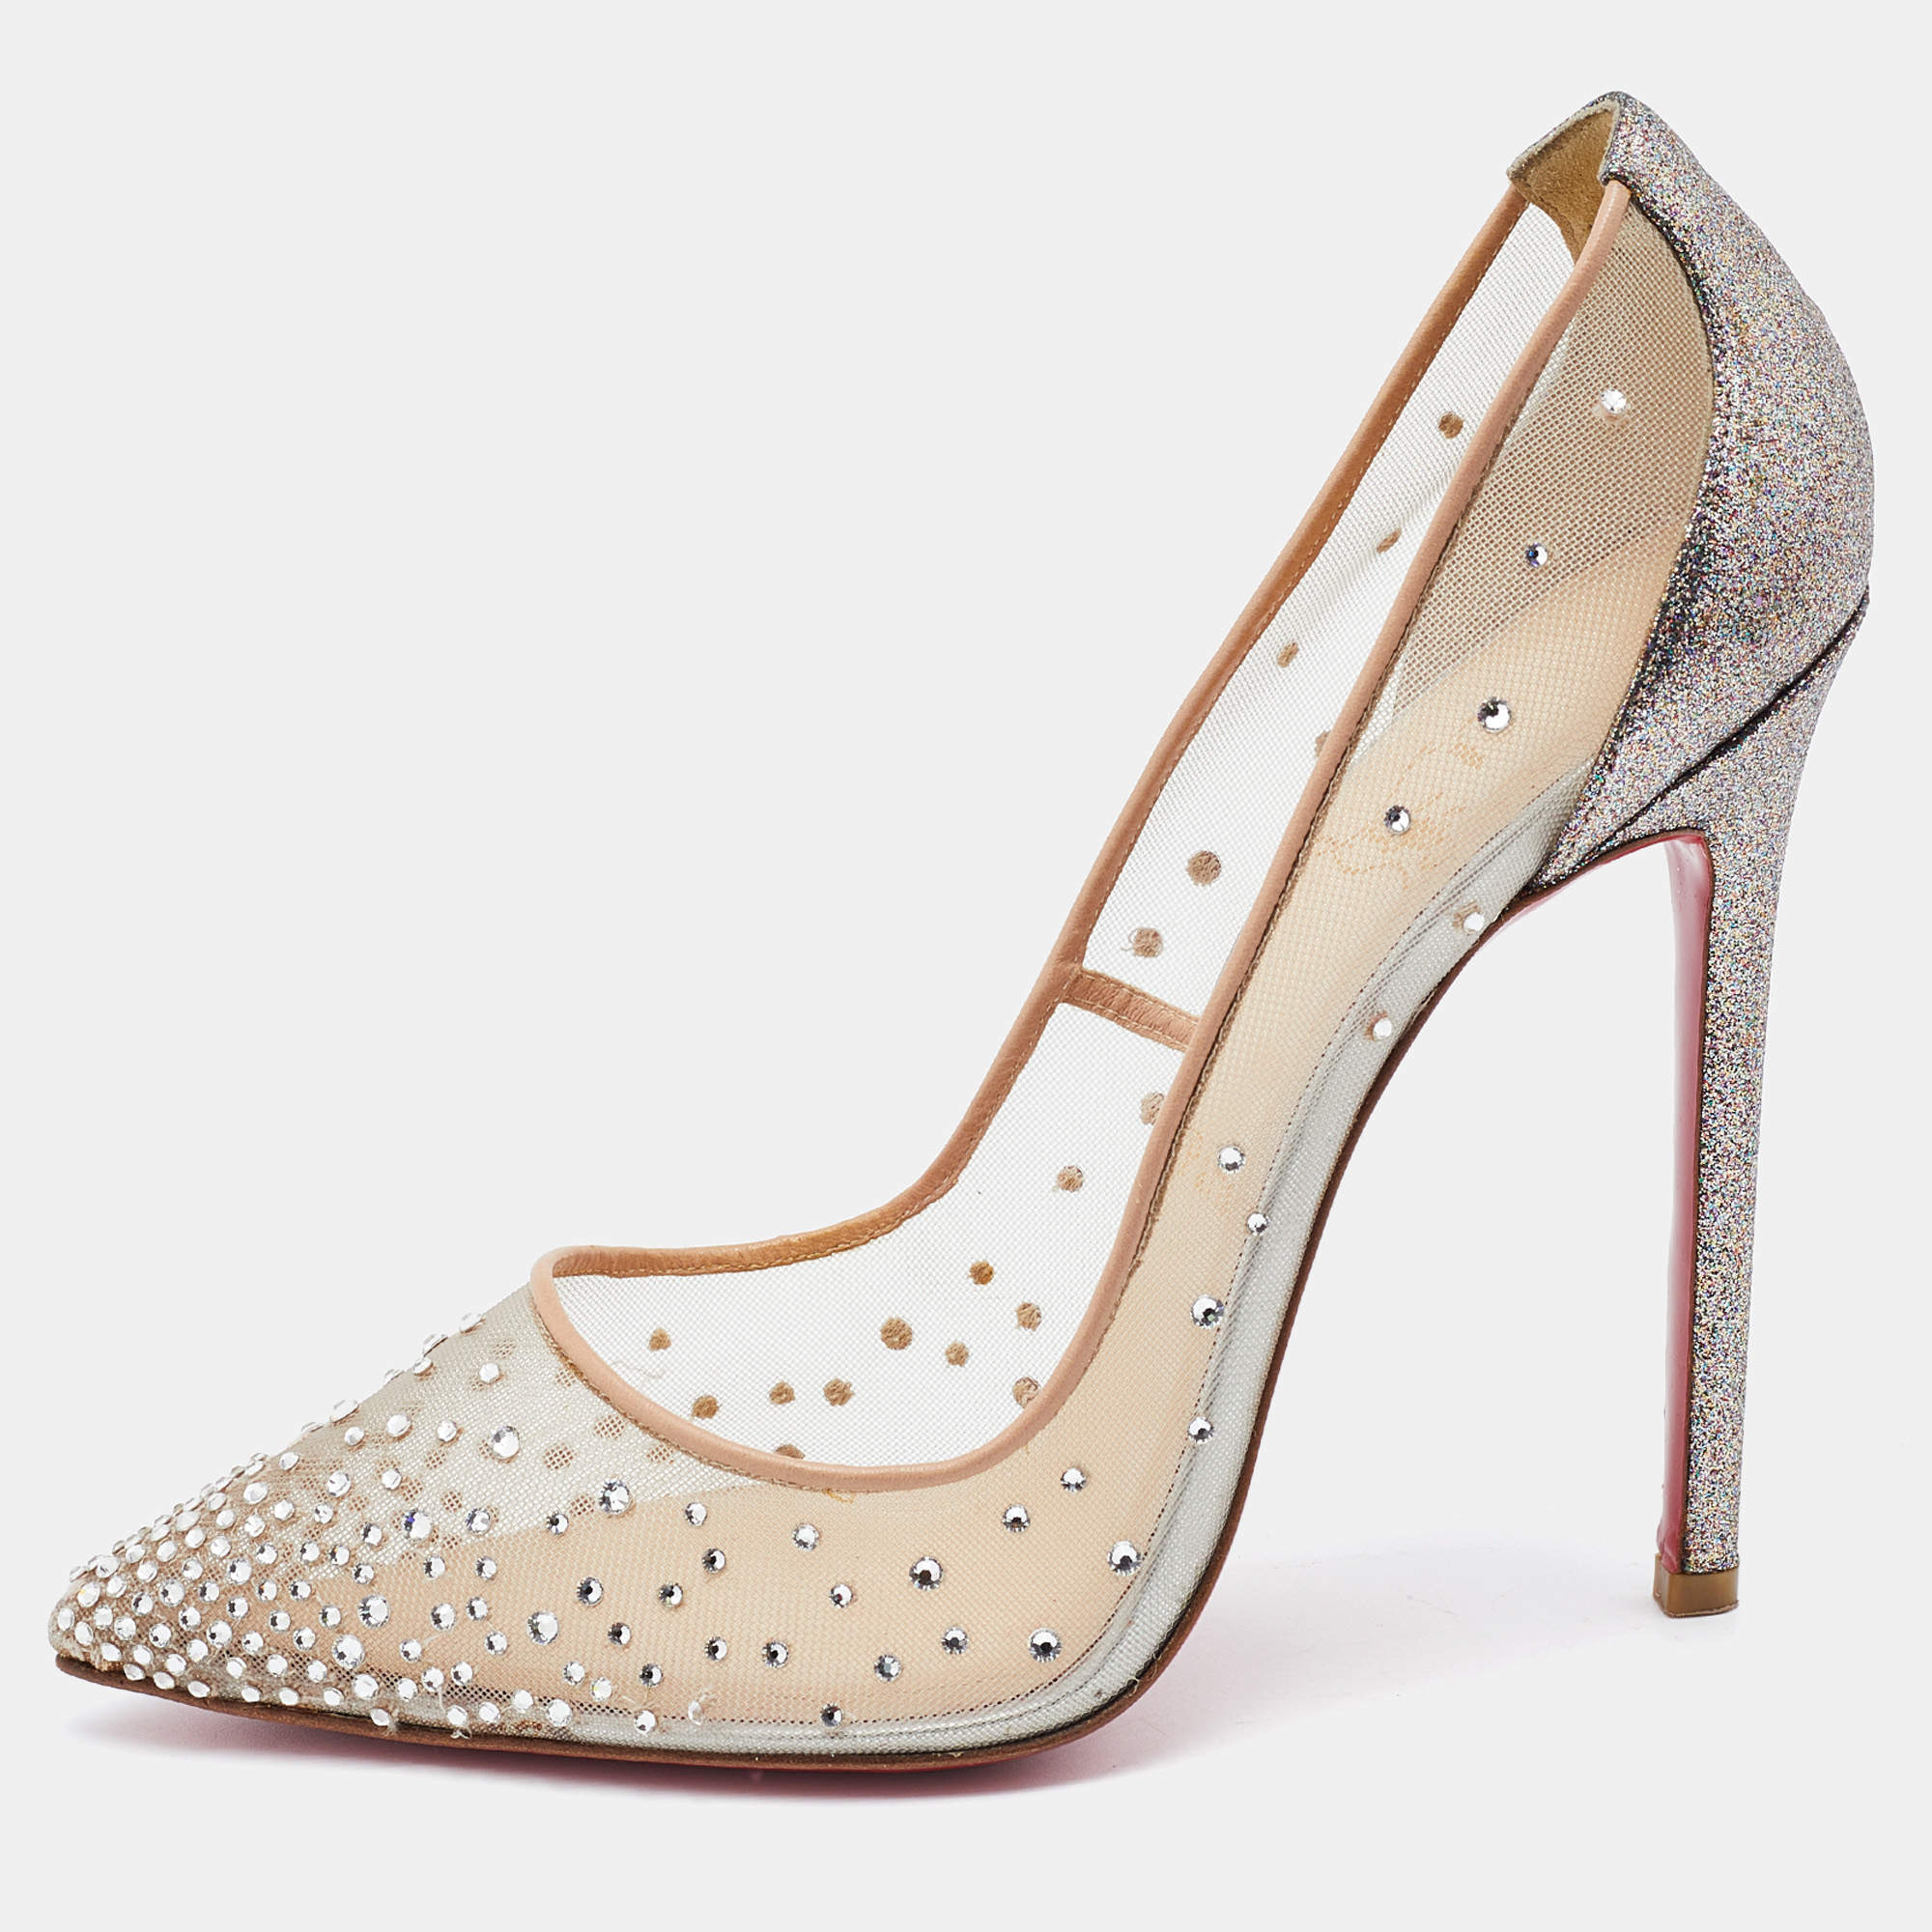 Christian Louboutin Beige Mesh and Leather Follies Strass Pumps Size 35  Christian Louboutin